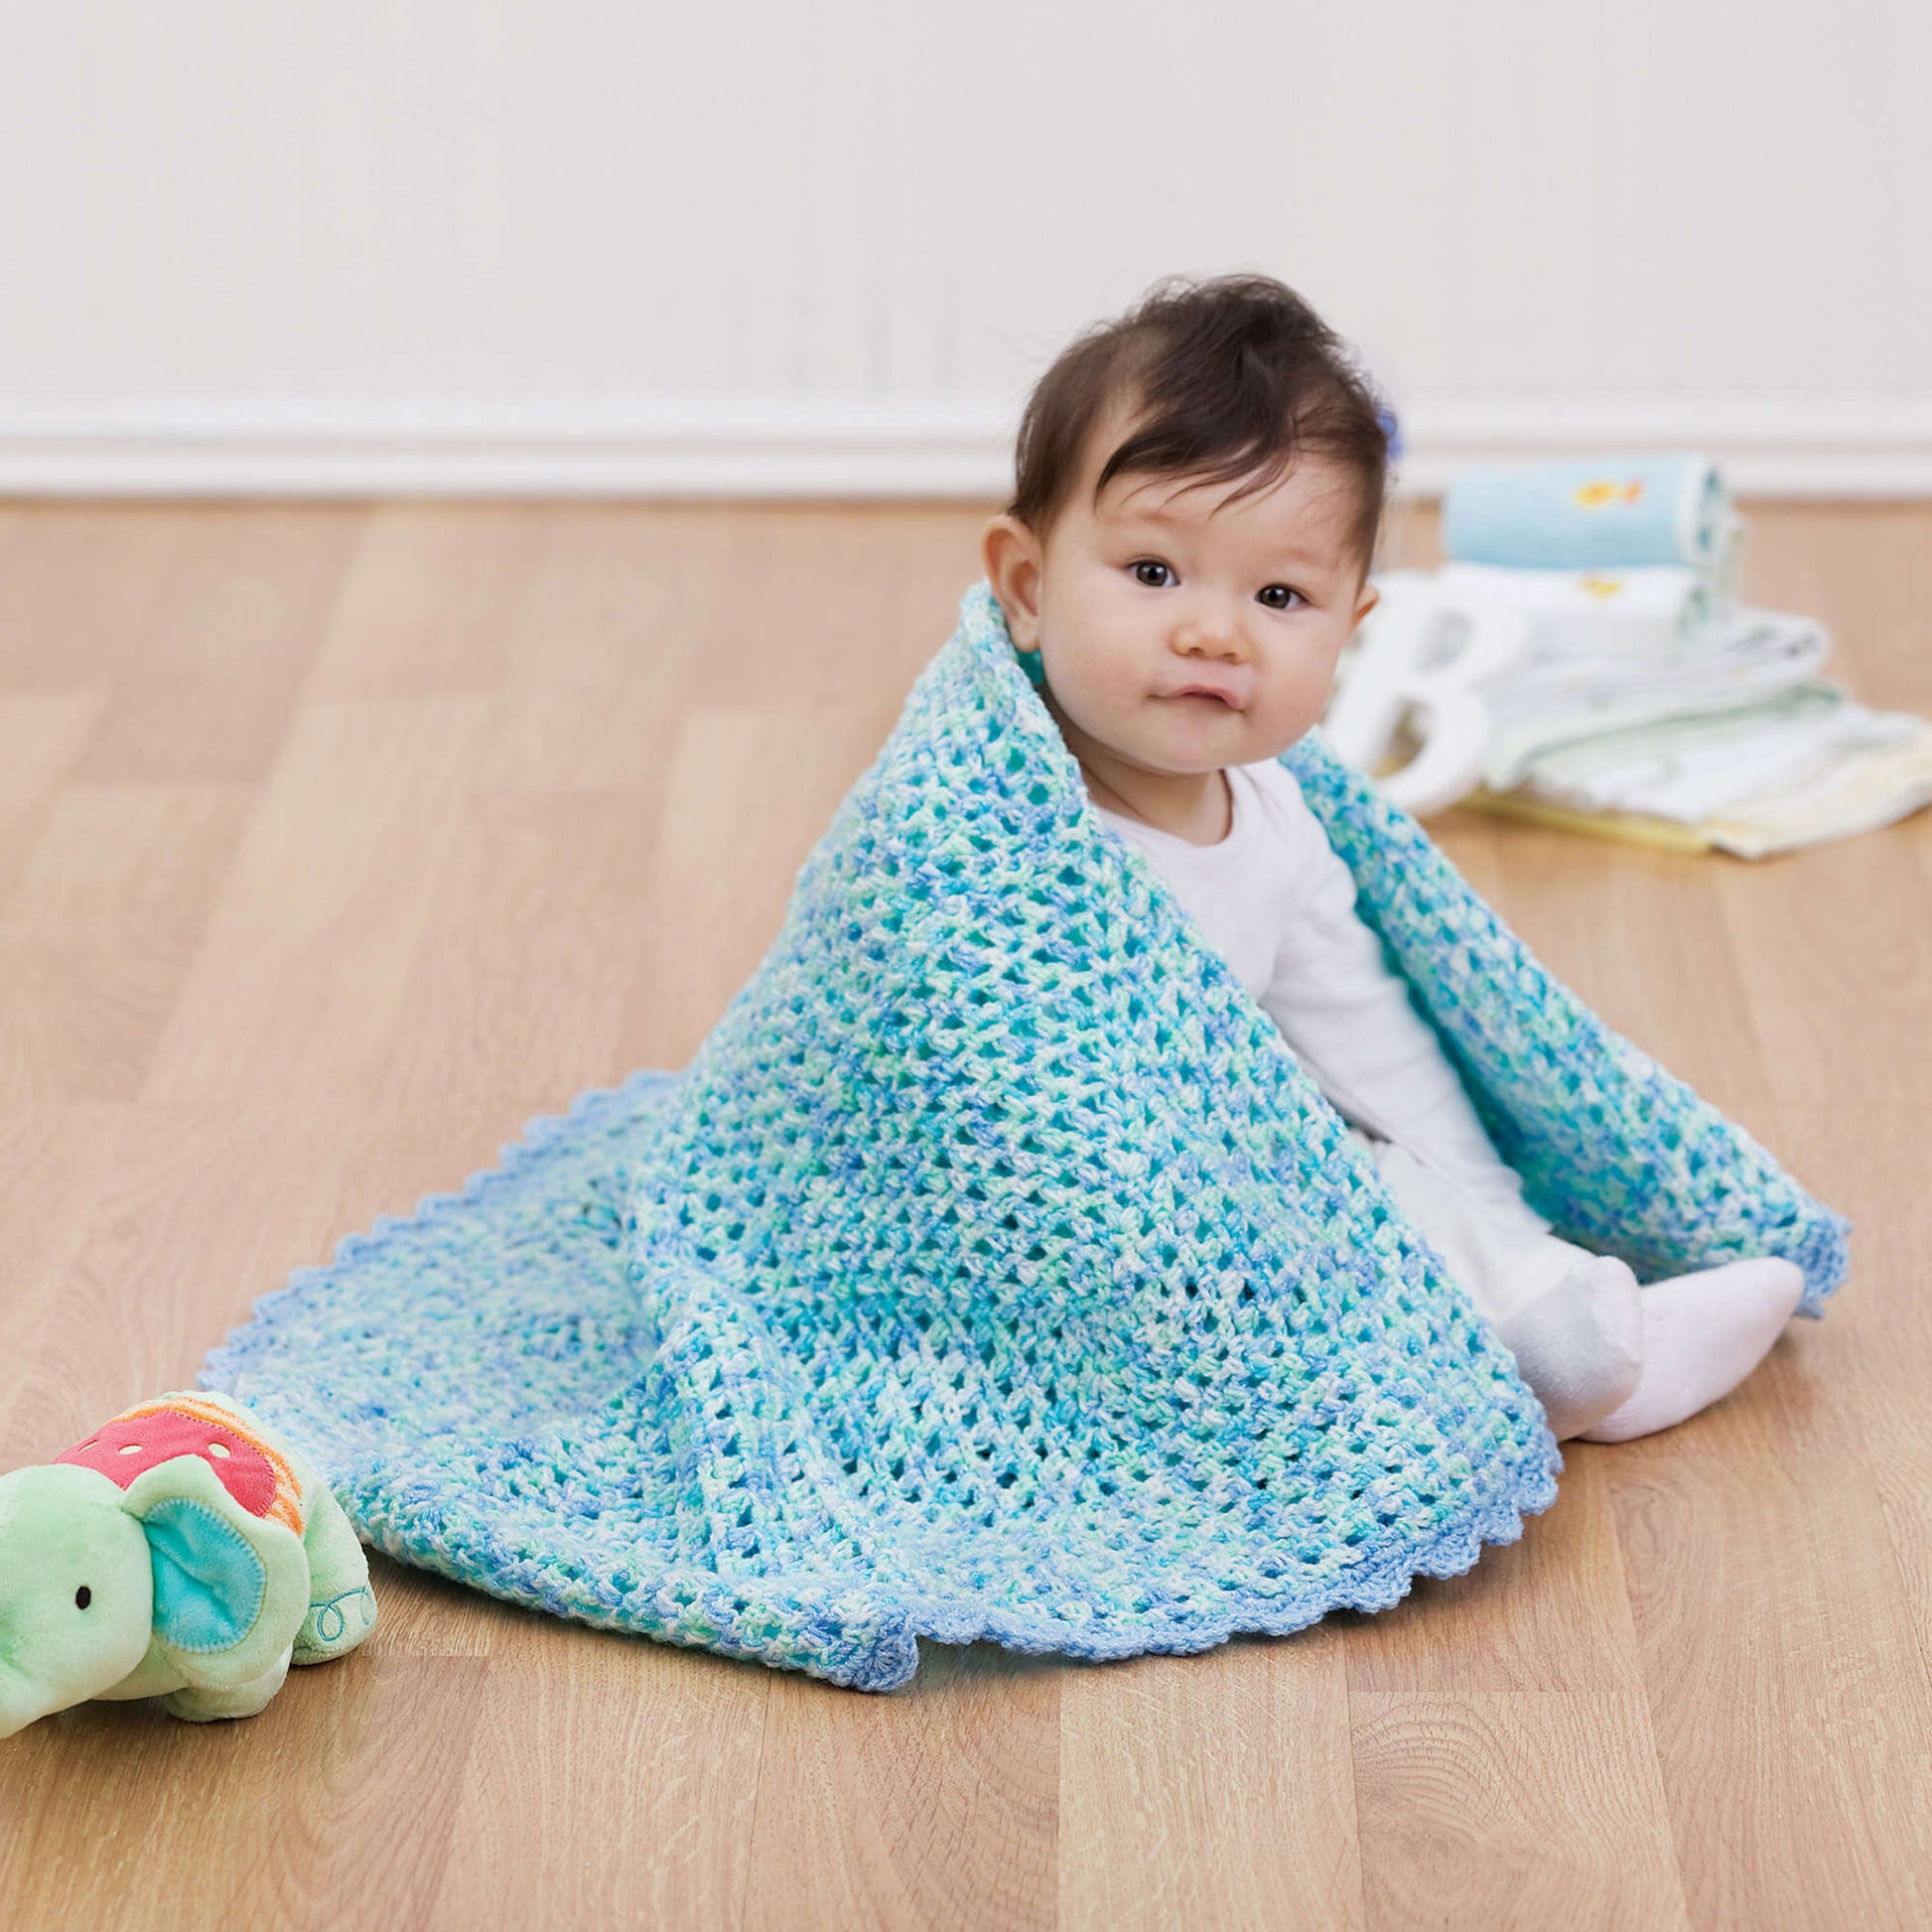 Free Red Heart Crochet Baby Lullaby Afghan Pattern